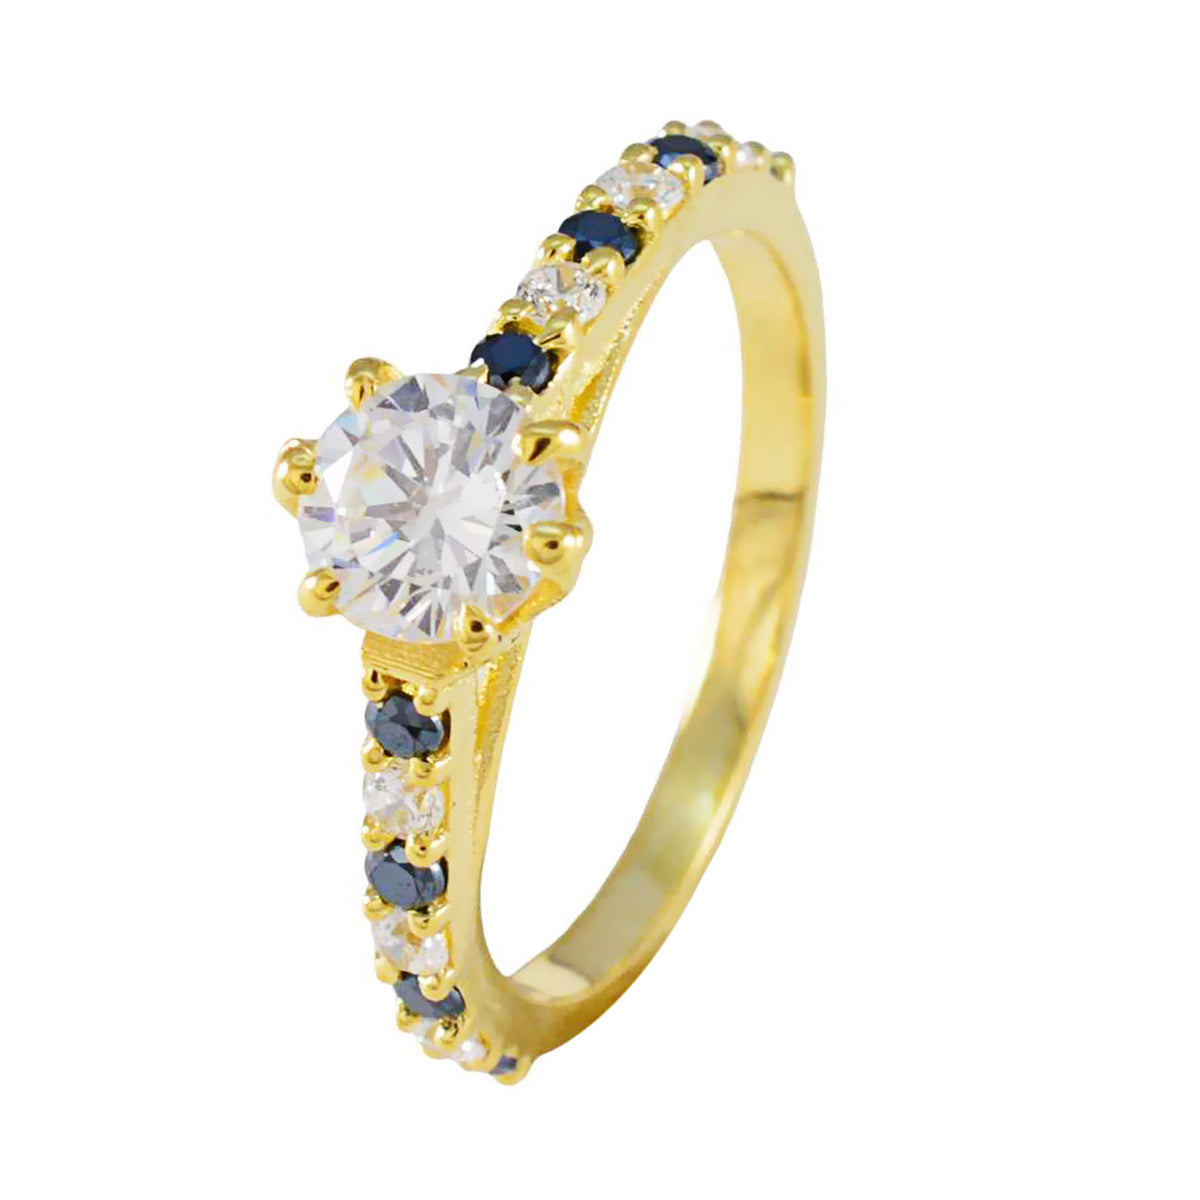 Riyo Jaipur Silver Ring With Yellow Gold Plating Blue Sapphire CZ Stone Round Shape Prong Setting Fashion Jewelry Mothers Day Ring